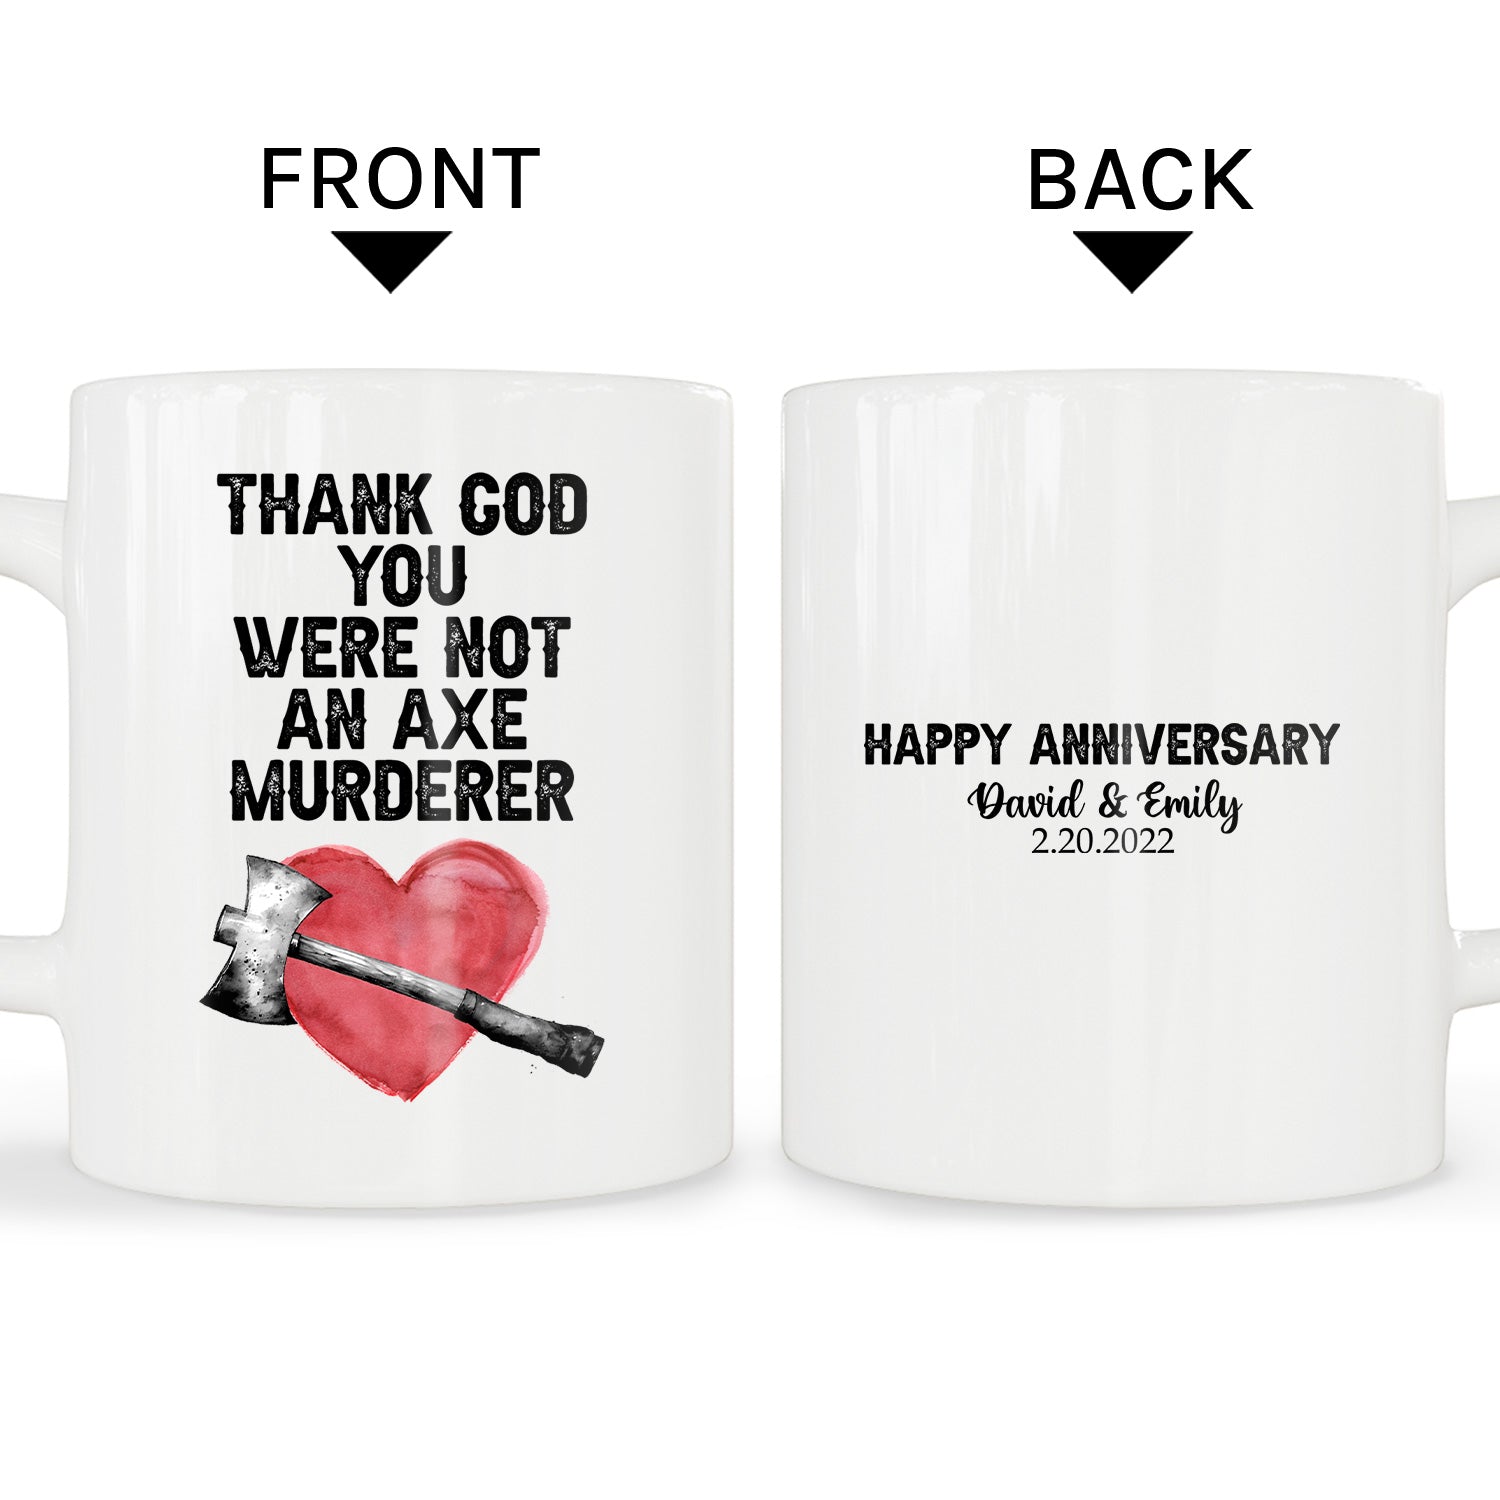 Custom Mugs and Pillows | Inexpensive Anniversary Gifts - The Elegance